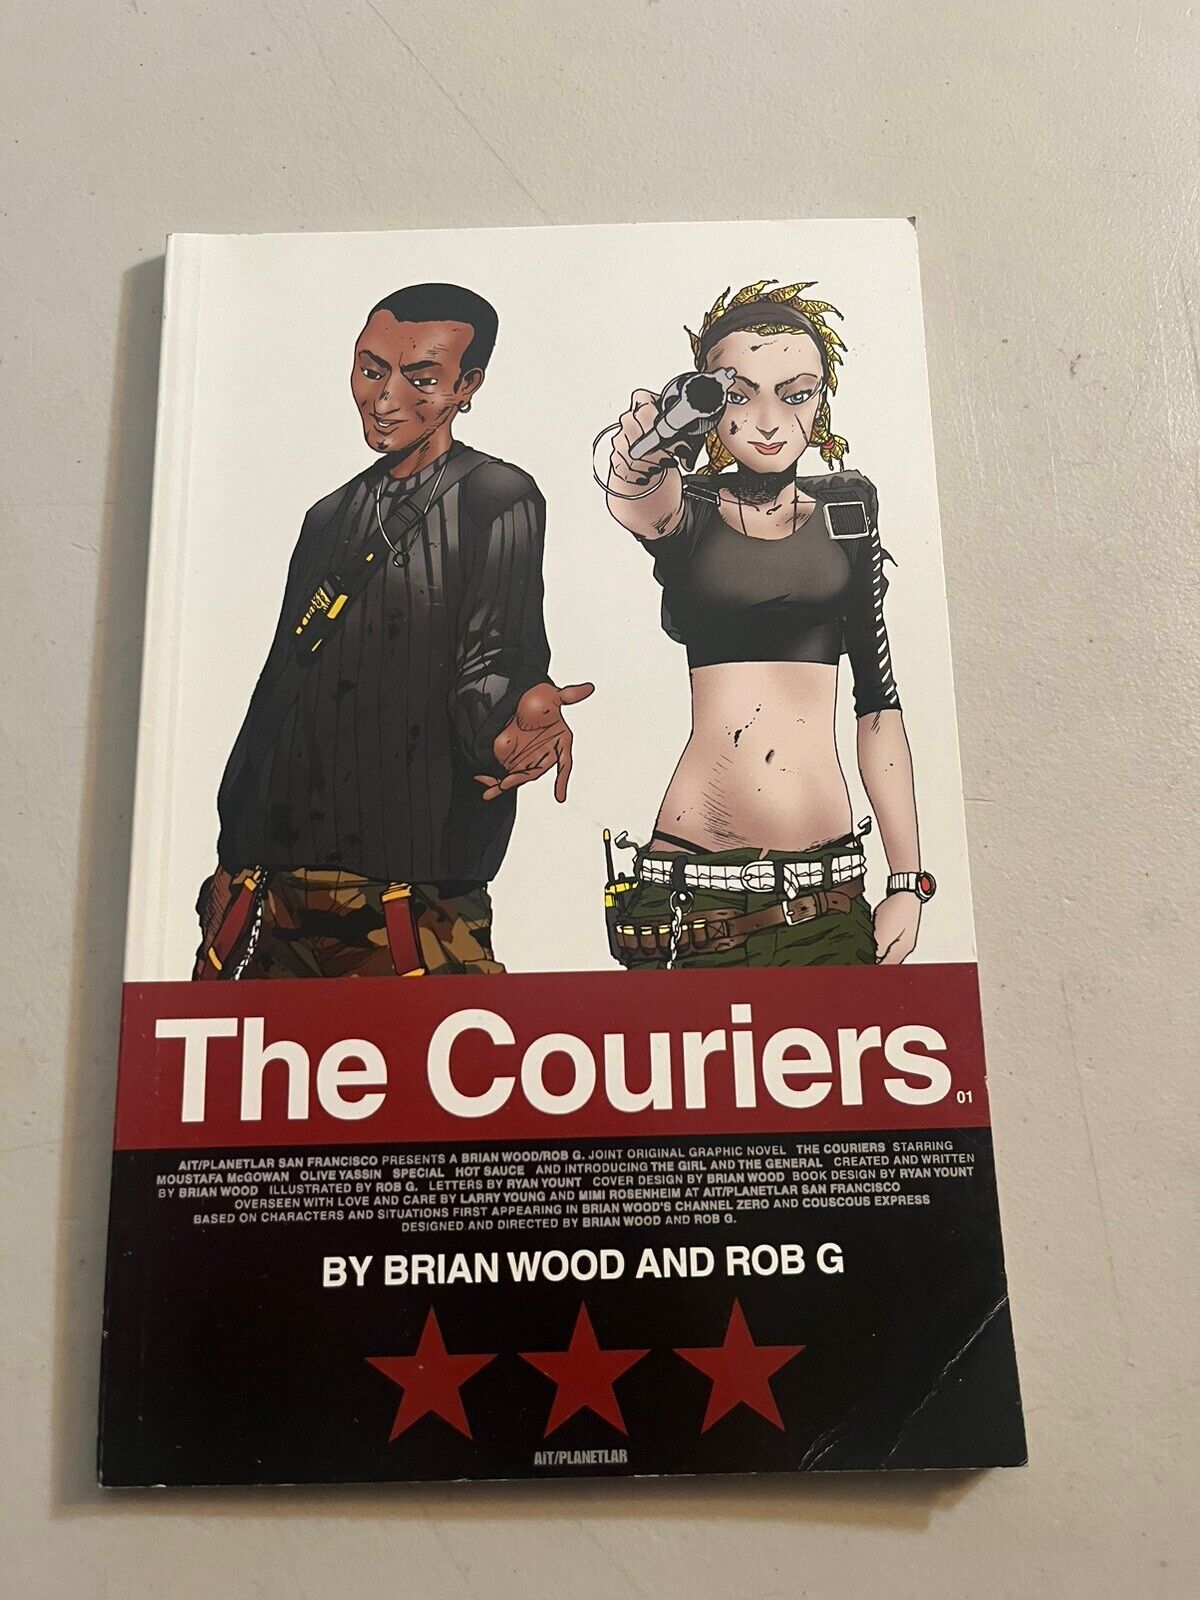 The Couriers by Brian Wood (2003, AiT/PLANETAR) — TPB